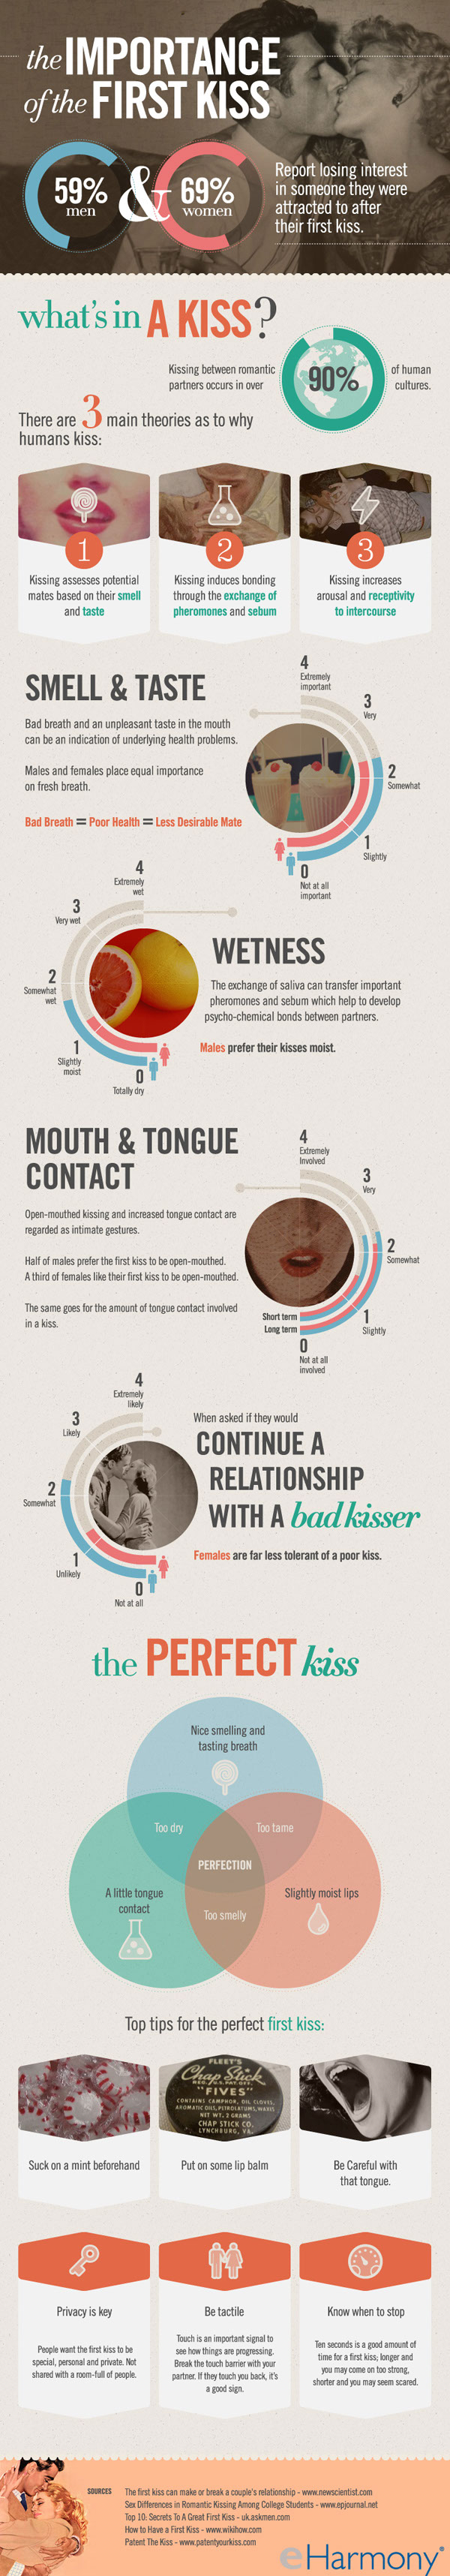 First Kiss Tips iNFOGRAPHiCs MANiA